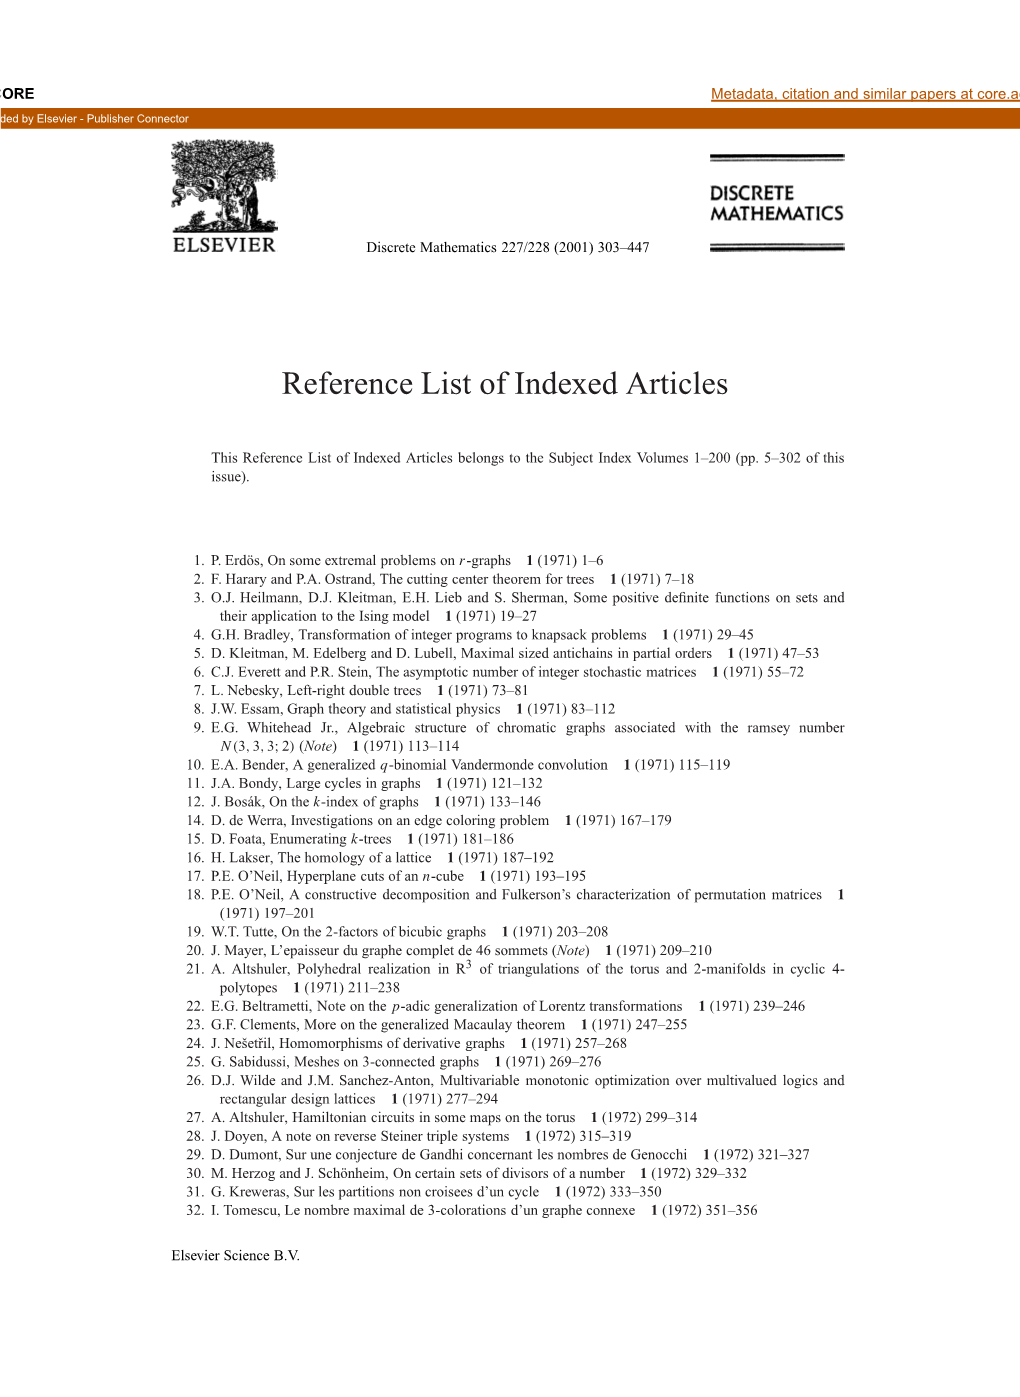 Reference List of Indexed Articles